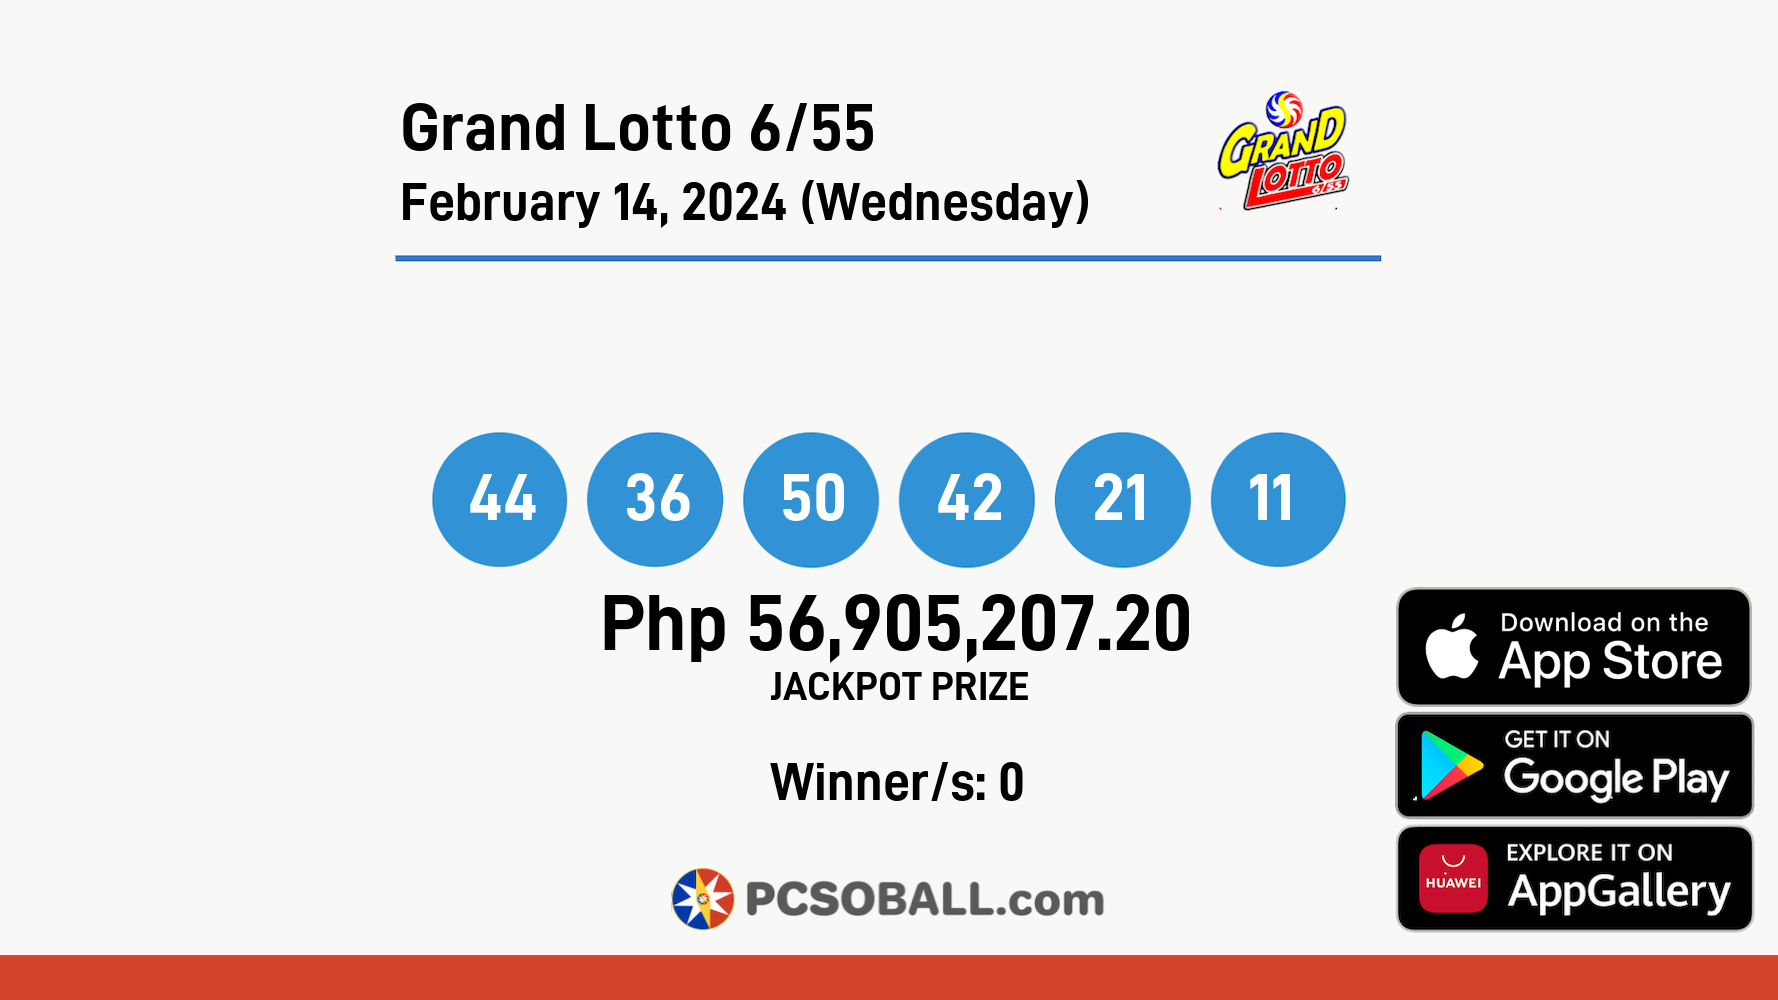 Grand Lotto 6/55 February 14, 2024 (Wednesday) Result